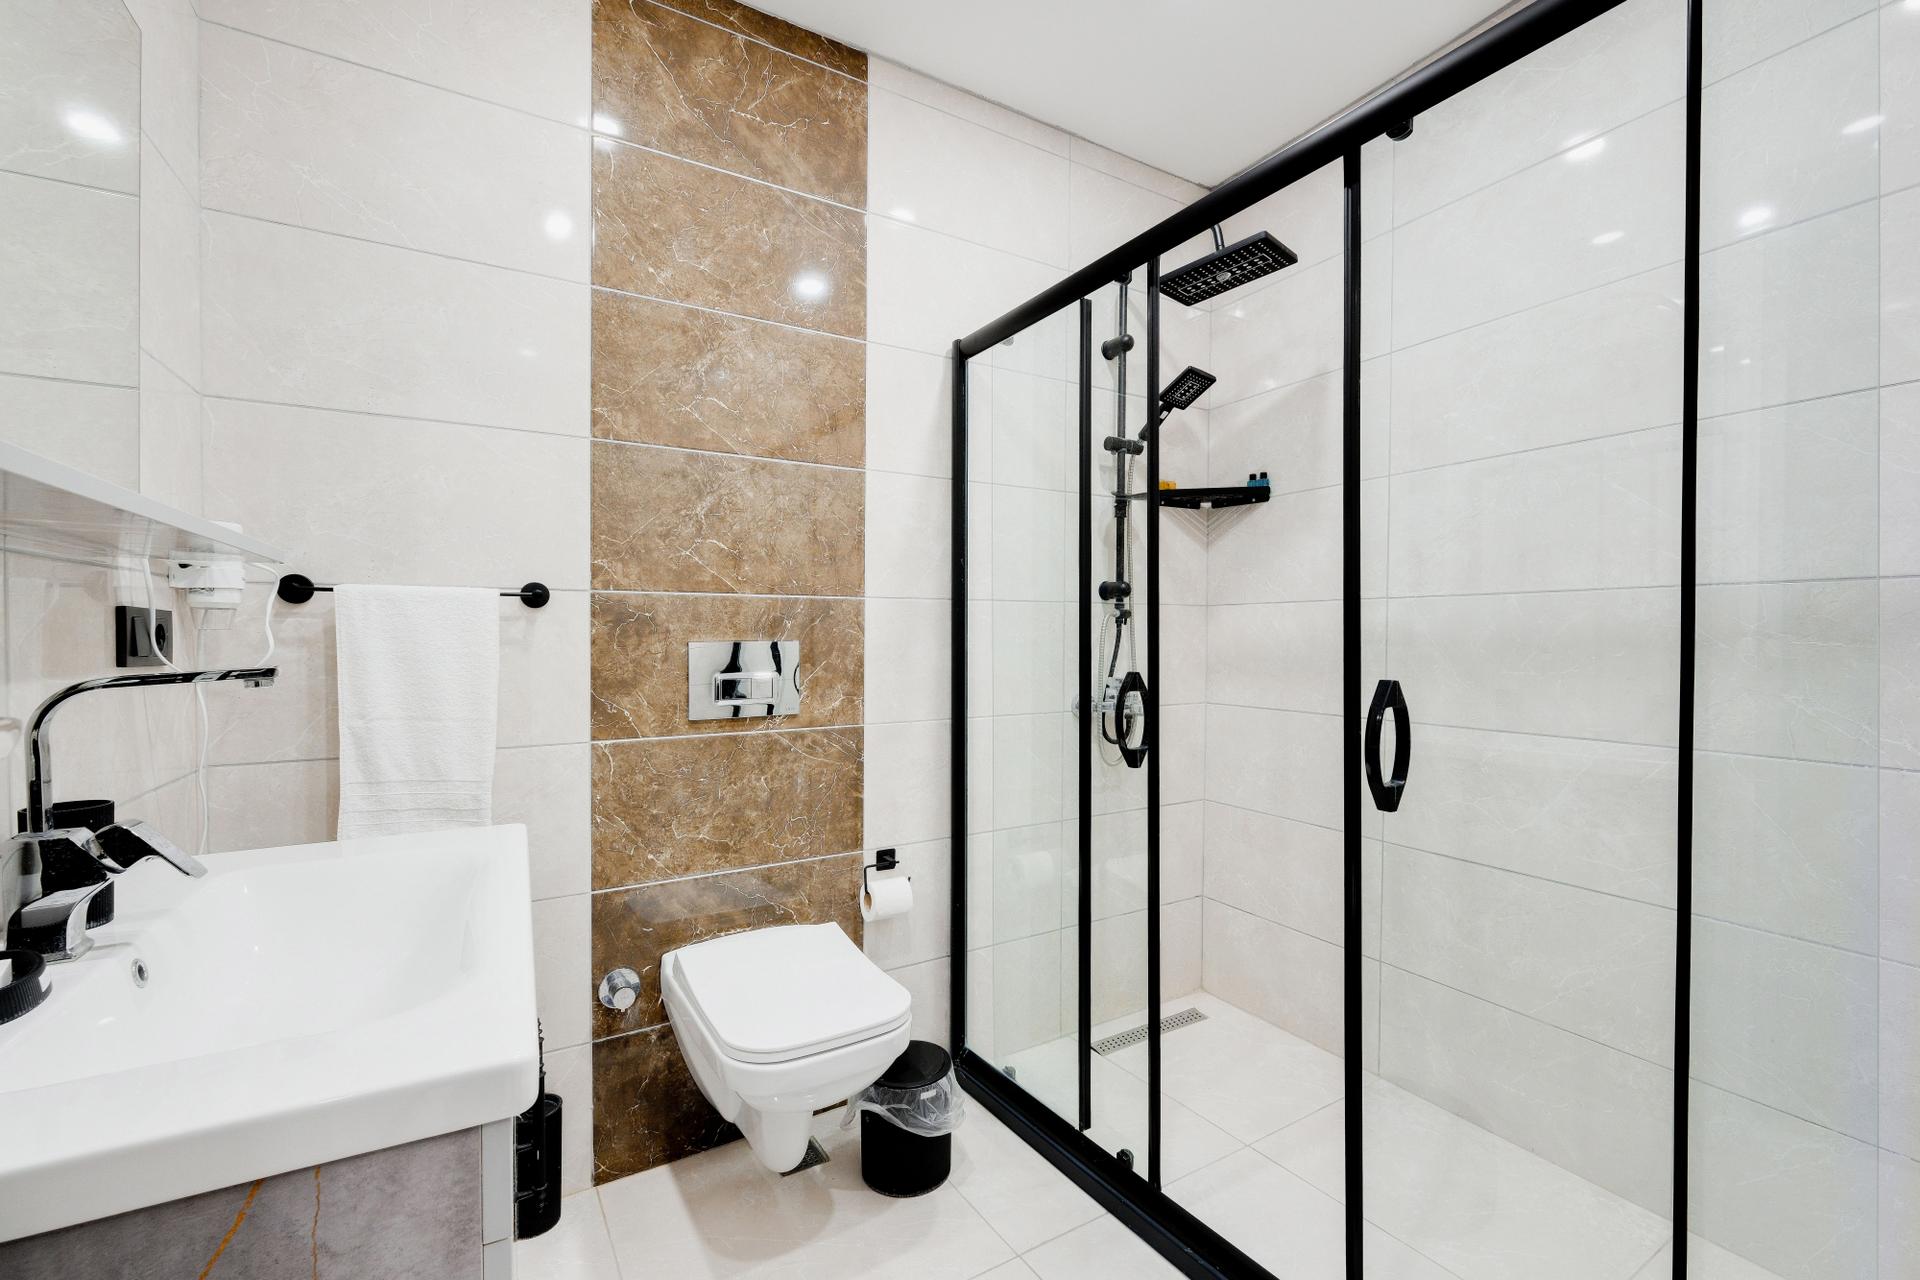 Unwind in a bathroom that provides a peaceful escape, with soft lighting and clean lines to soothe the senses.